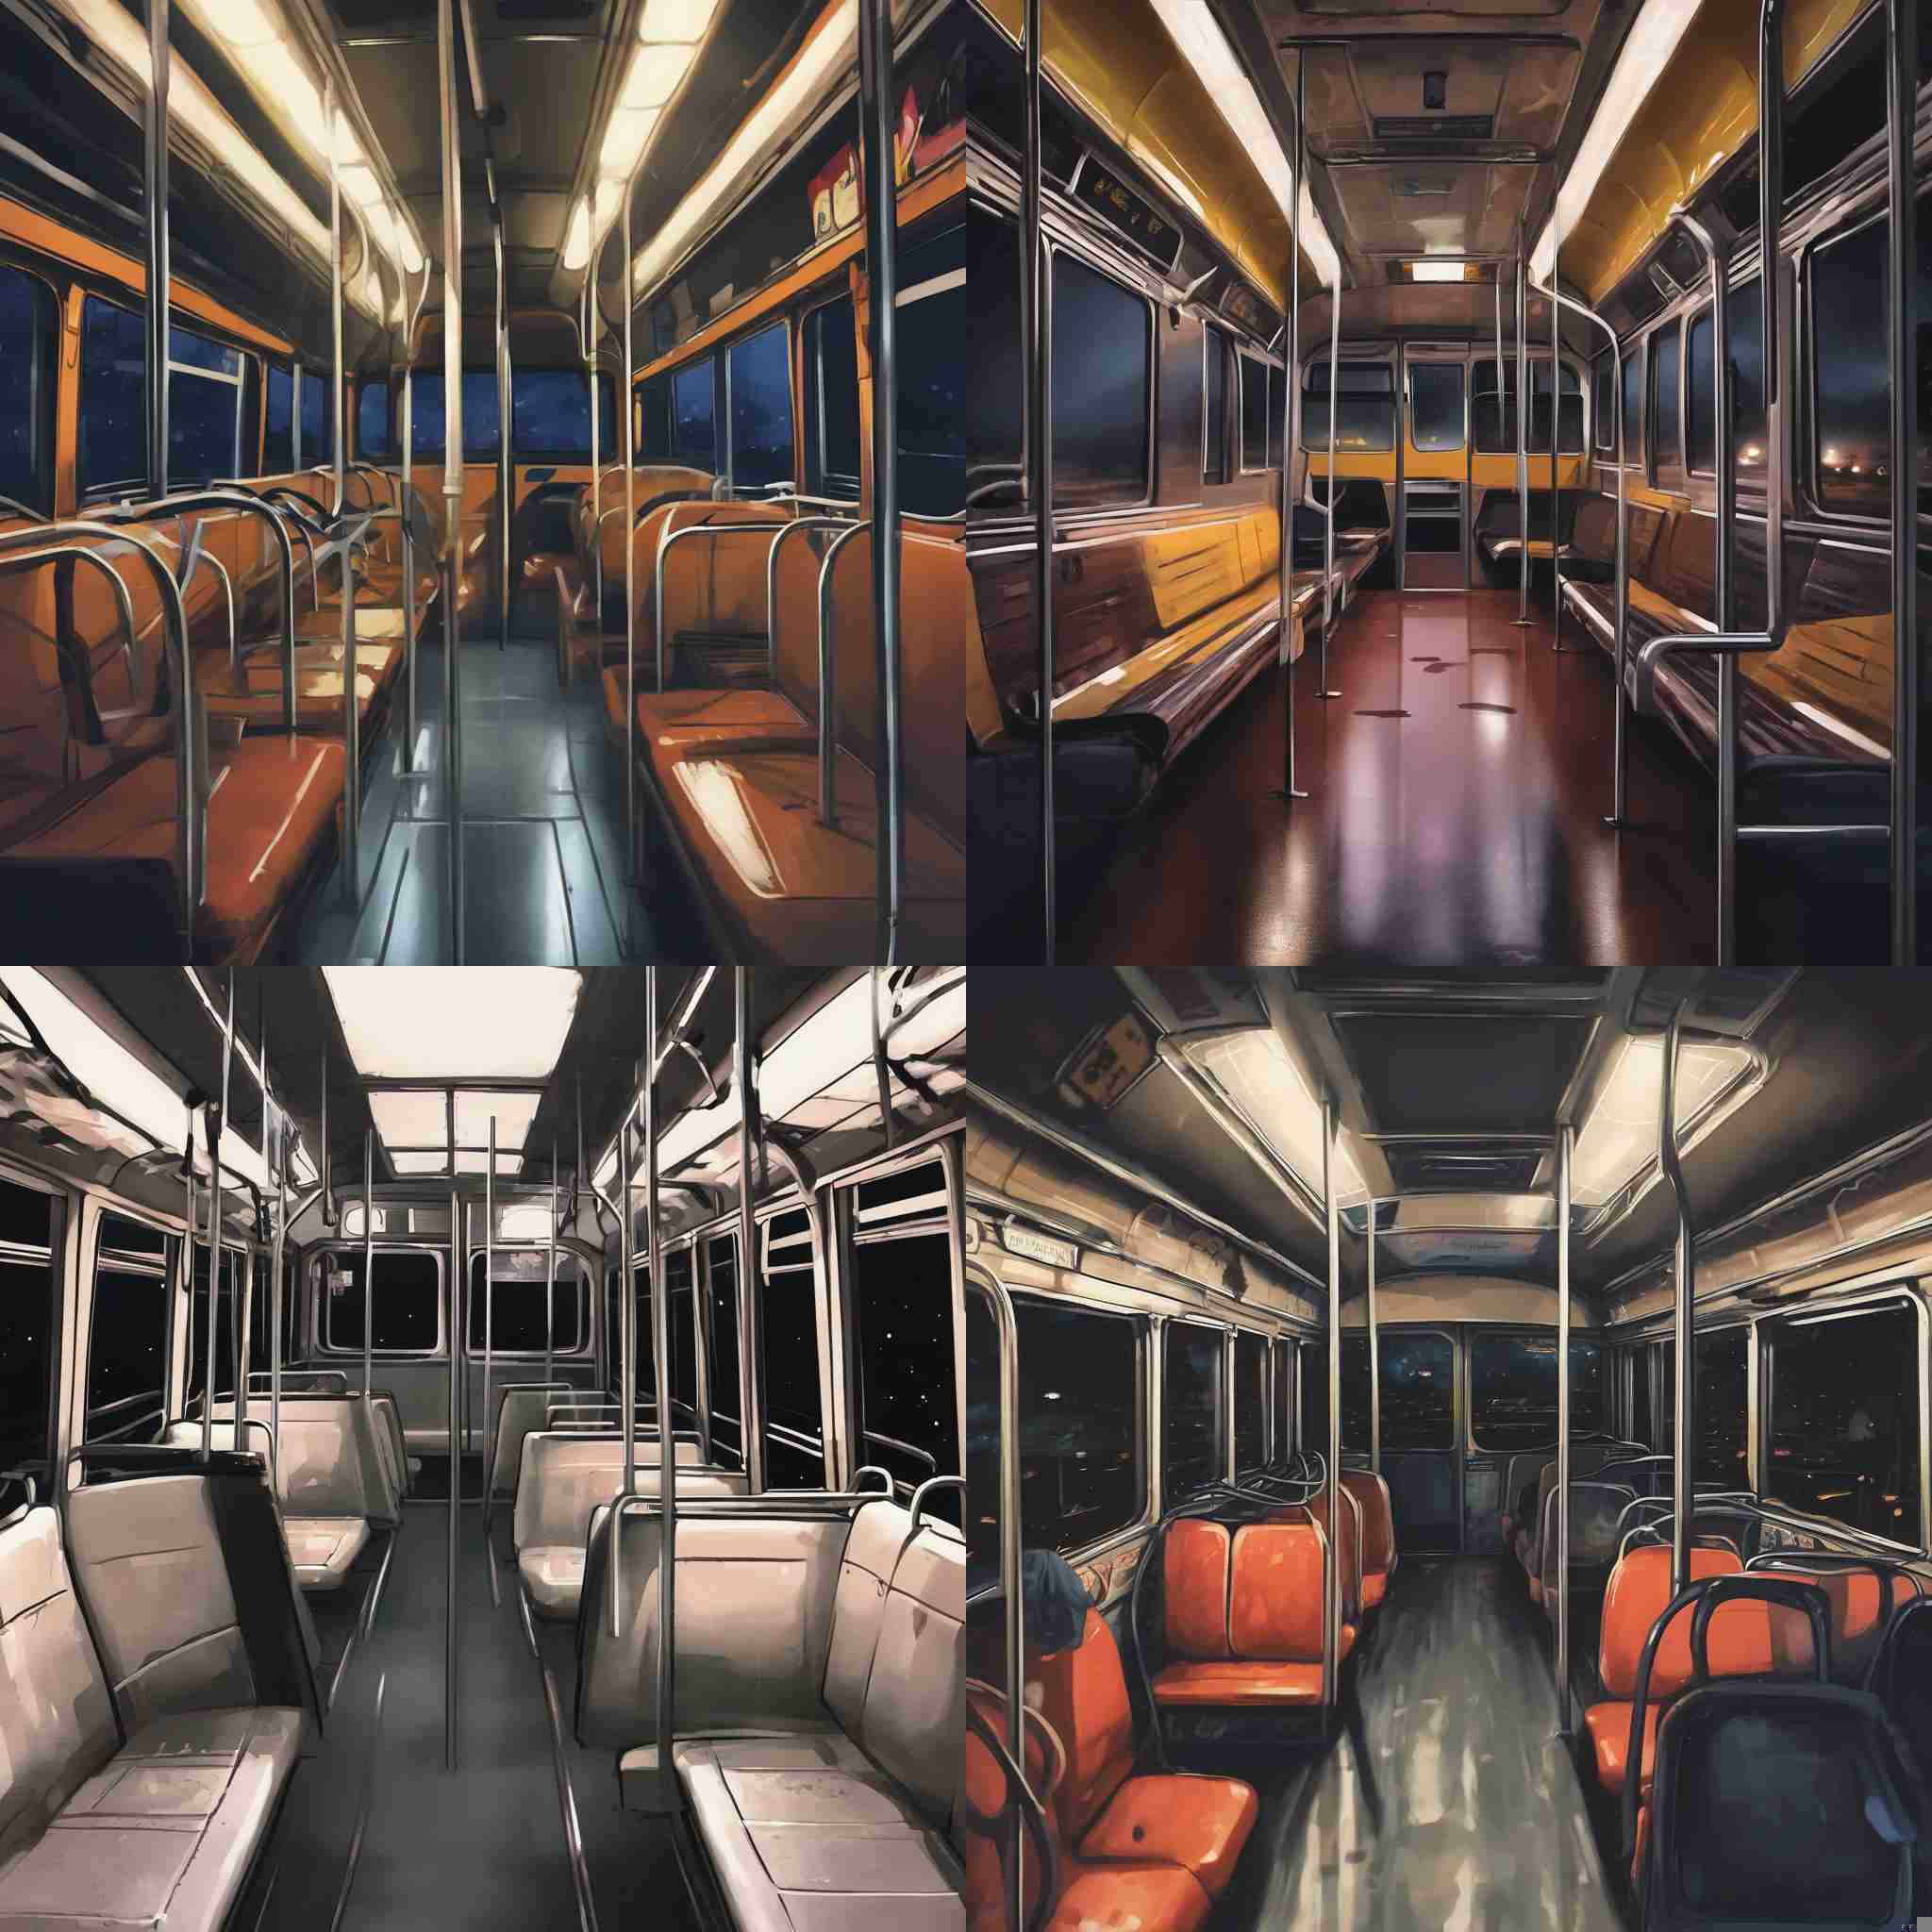 The inside of a bus at 1am